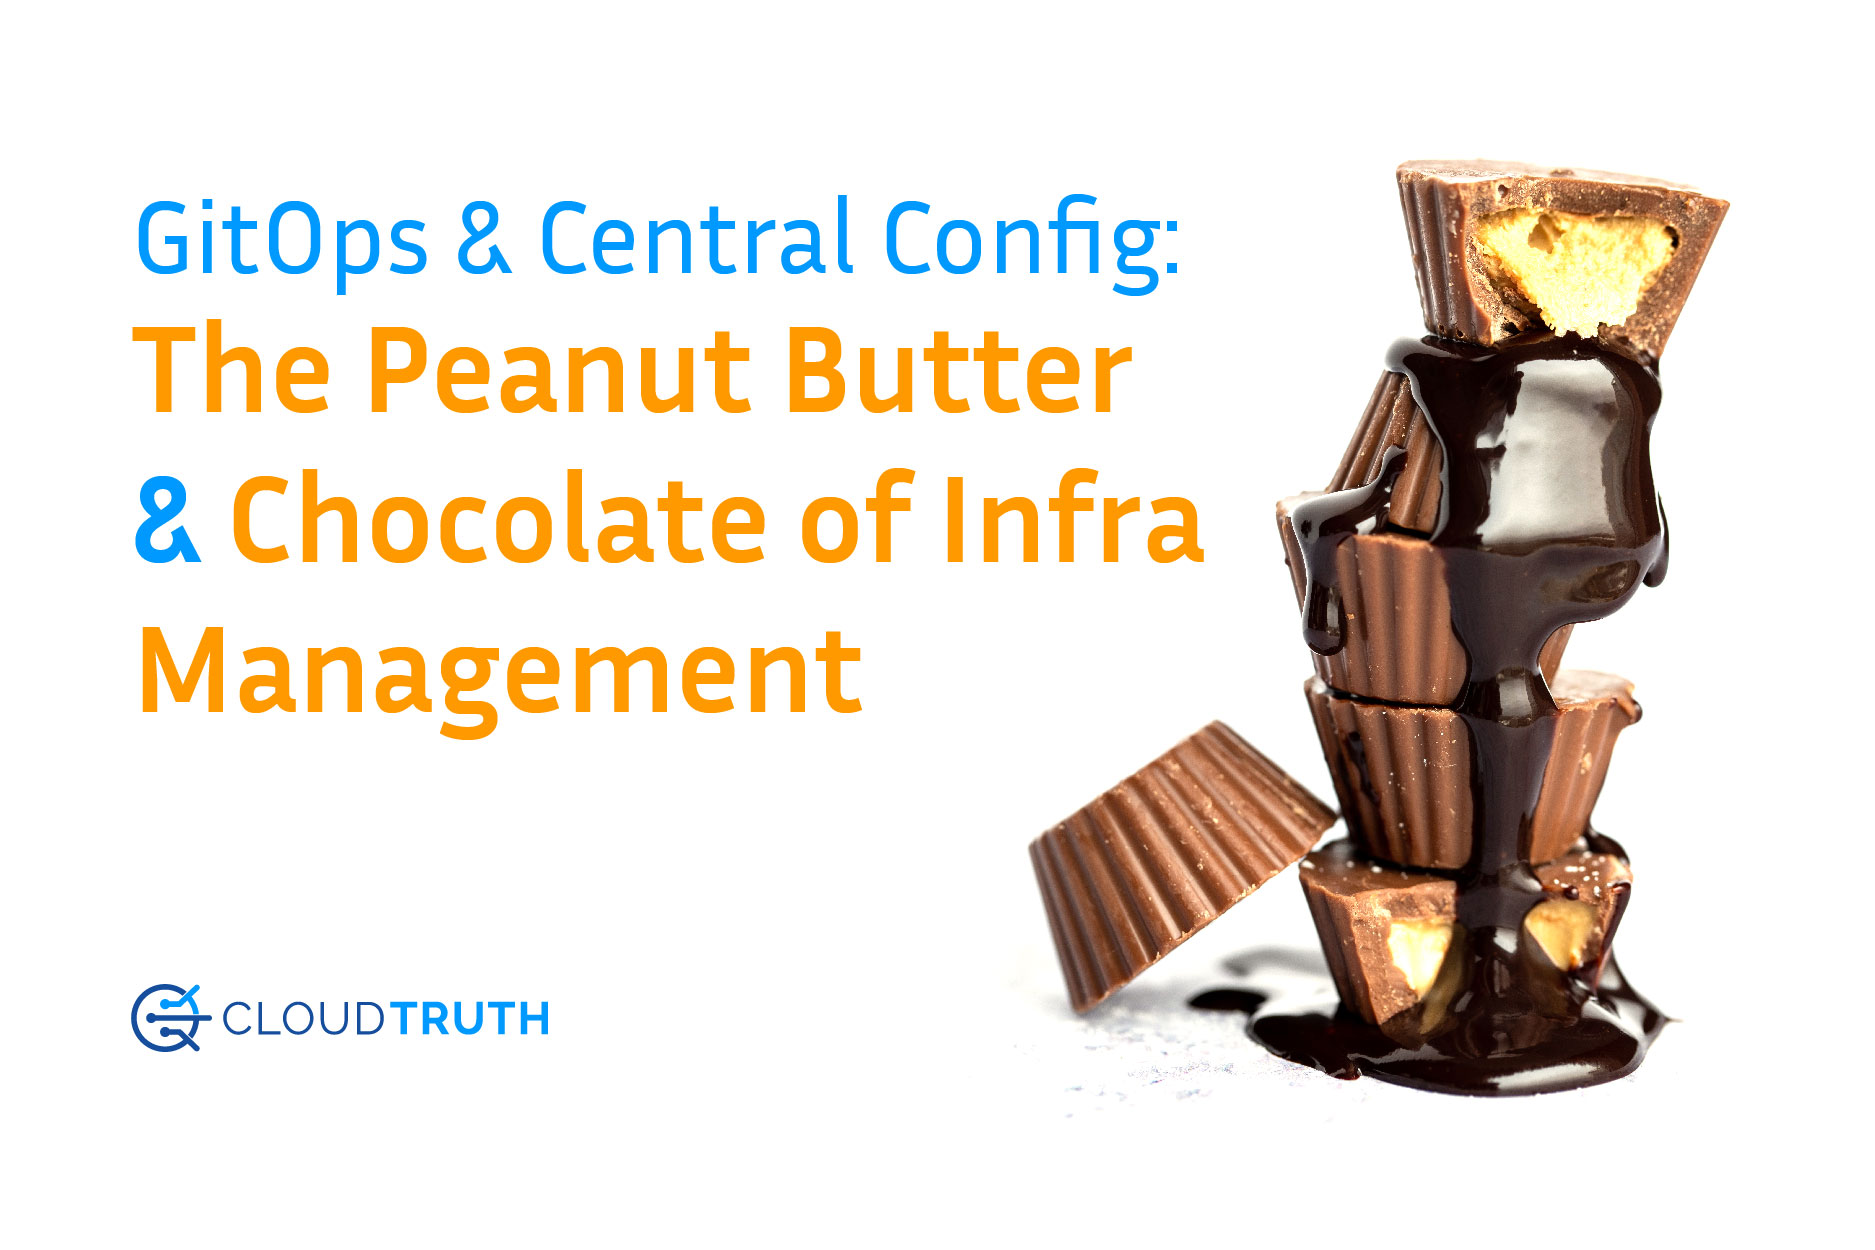 GitOps and Centralized Config: Like Peanut Butter & Chocolate